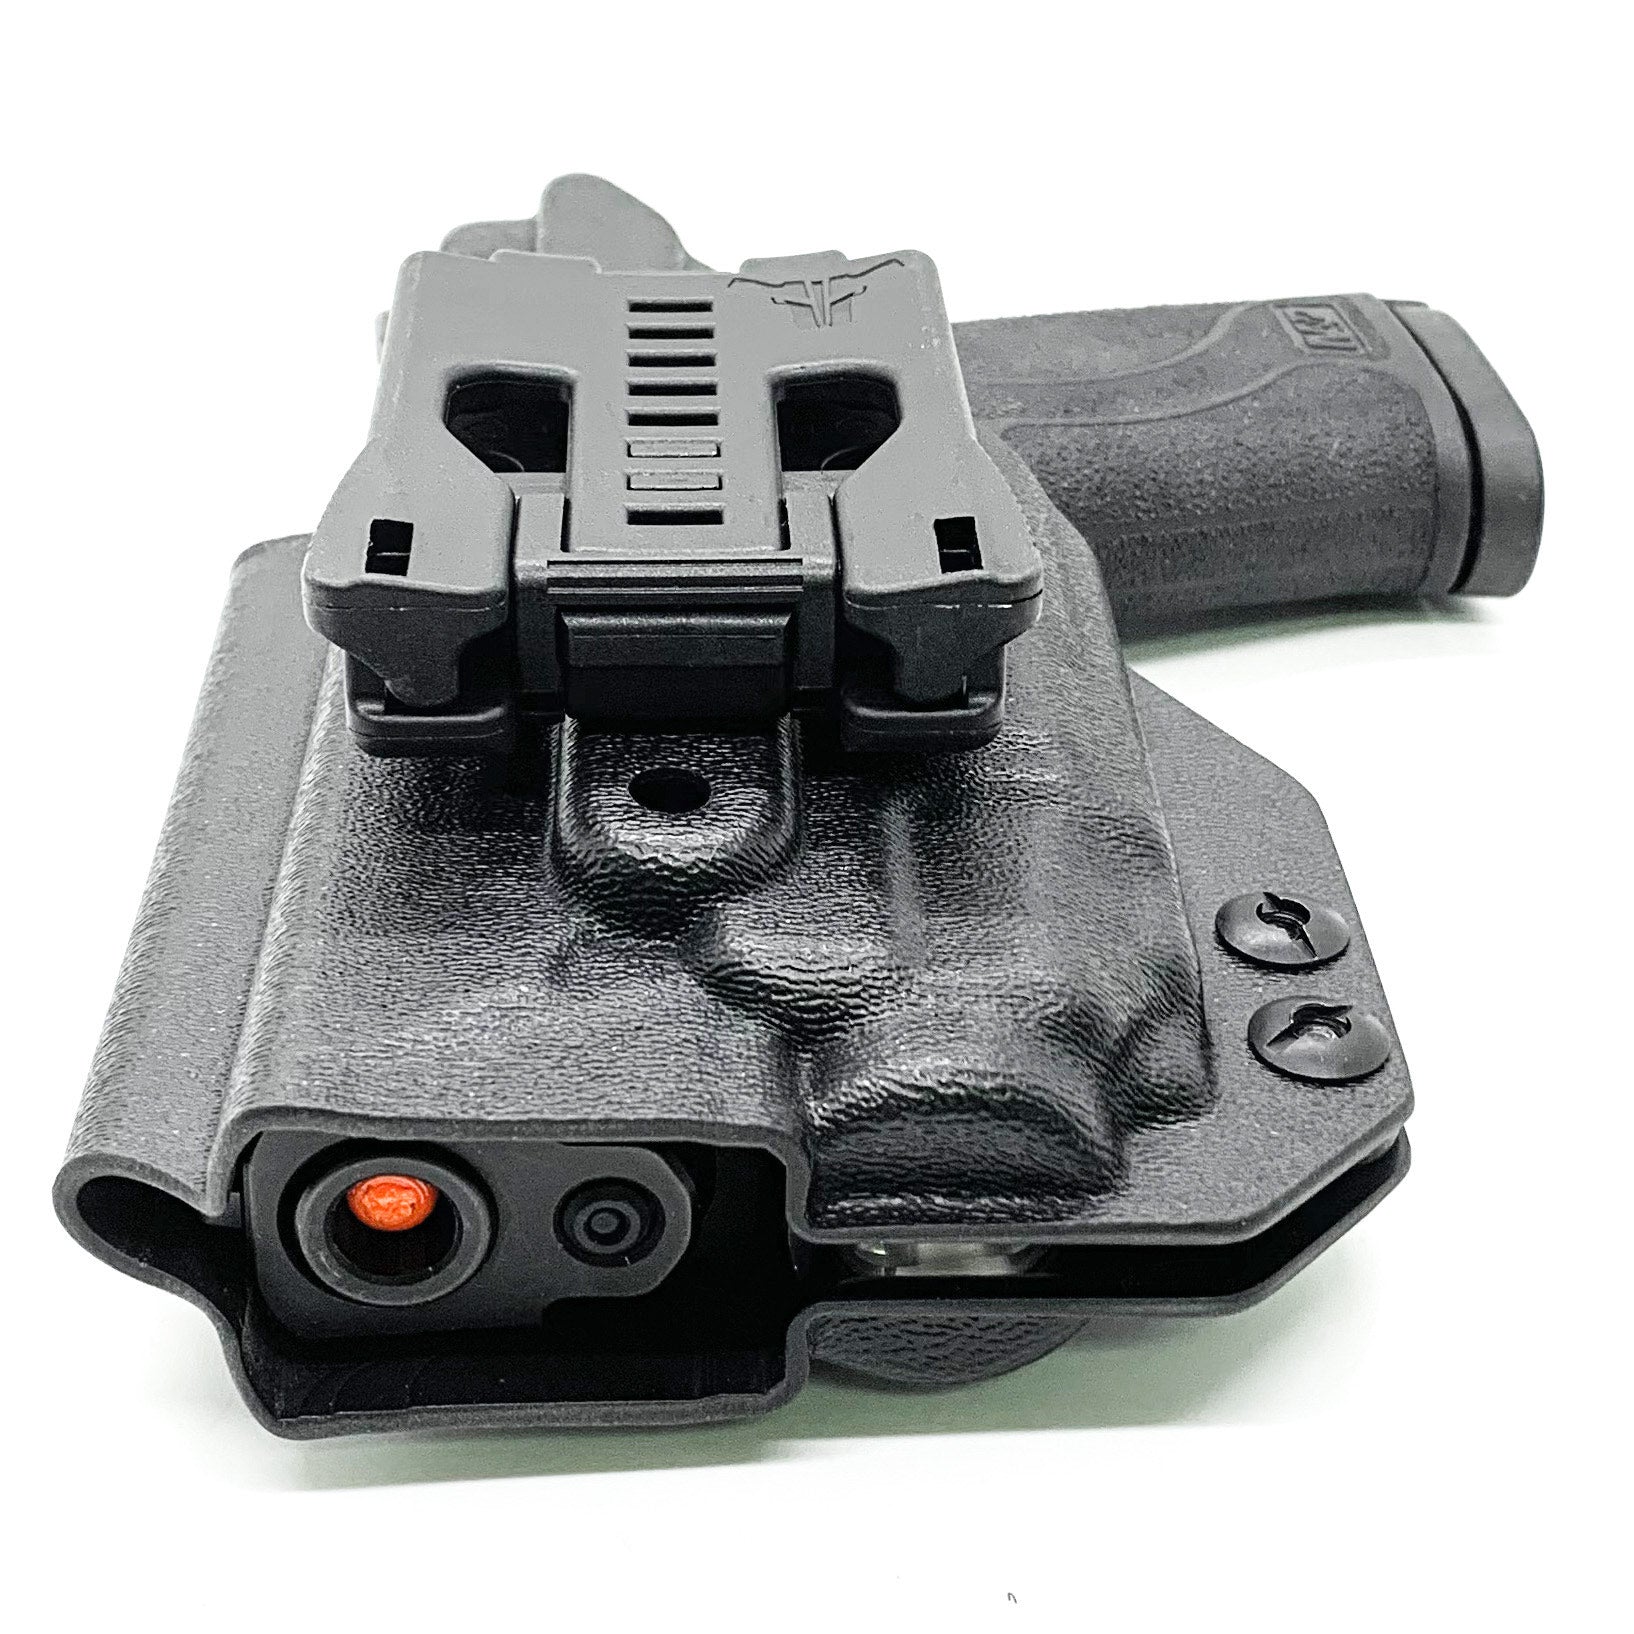 For the best KYDEX OWB Outside Waistband Kydex holster designed to fit the Smith & Wesson M&P 9 Shield EZ with Streamlight TLR-8 or TLR-8A weapon-mounted light, shop Four Brothers Holsters. Full sweat guard adjustable retention minimal material and smooth edges to reduce printing.  9EZ EZ9 S&W Easy 9 EZ